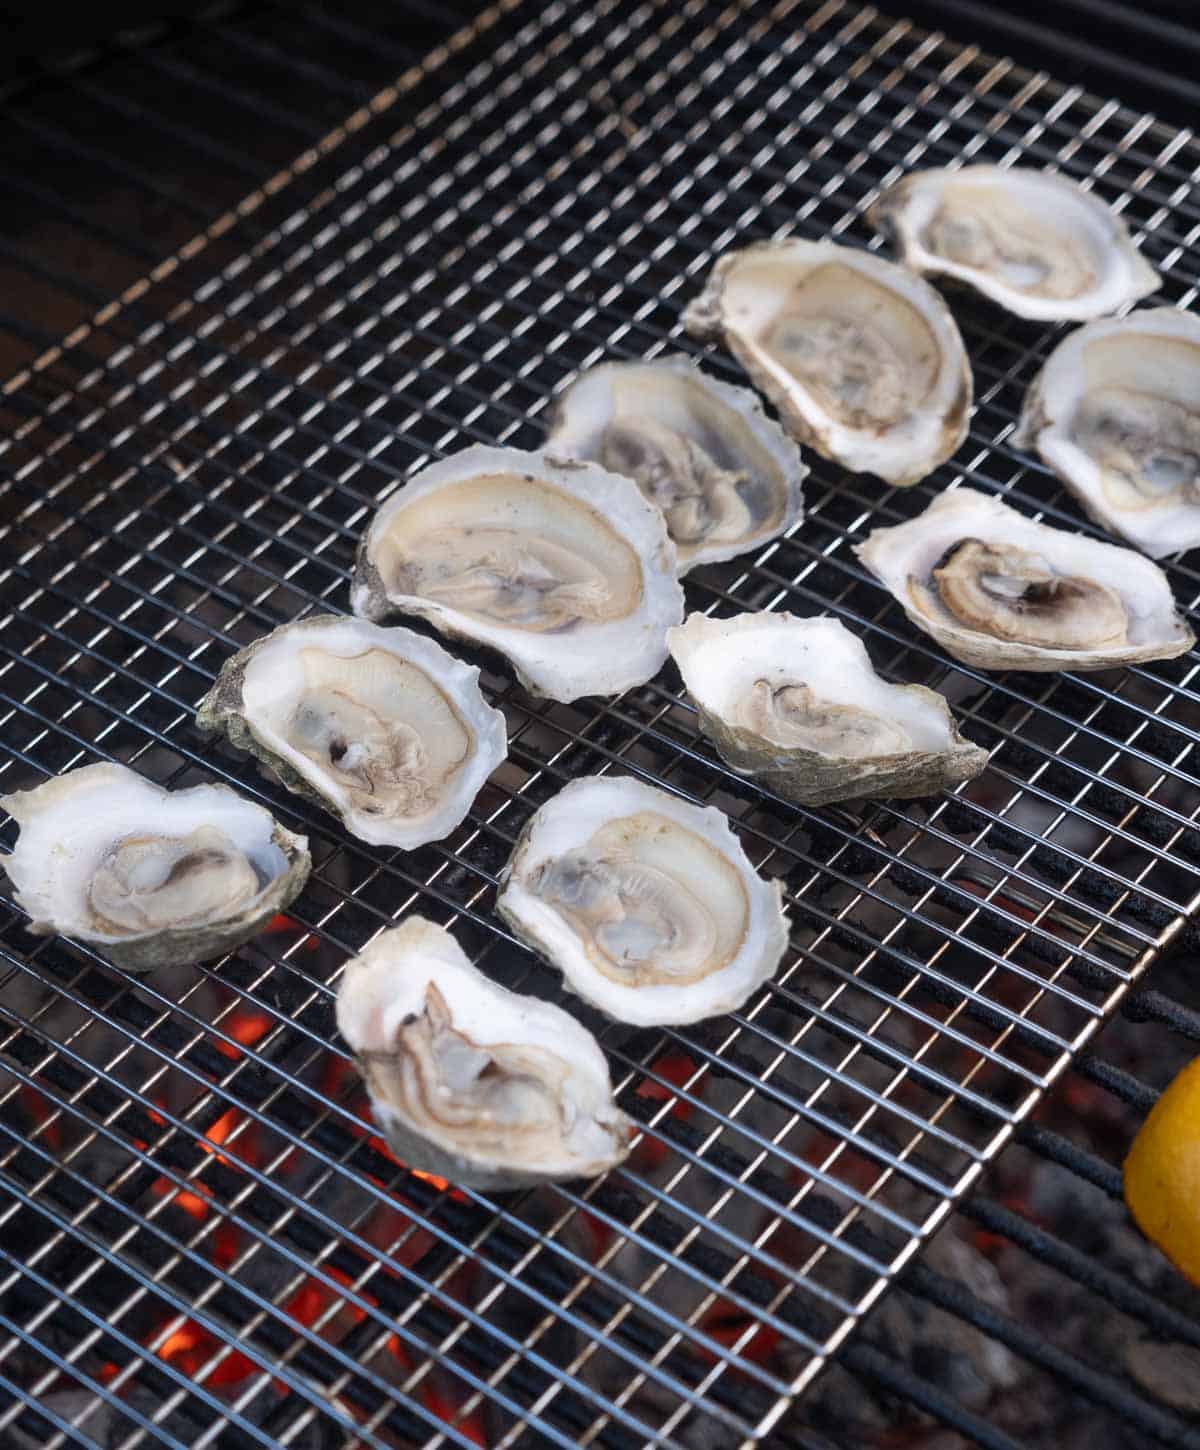 Oysters on the grill on a cookie drying rack to make for easy on and off the hot grill.